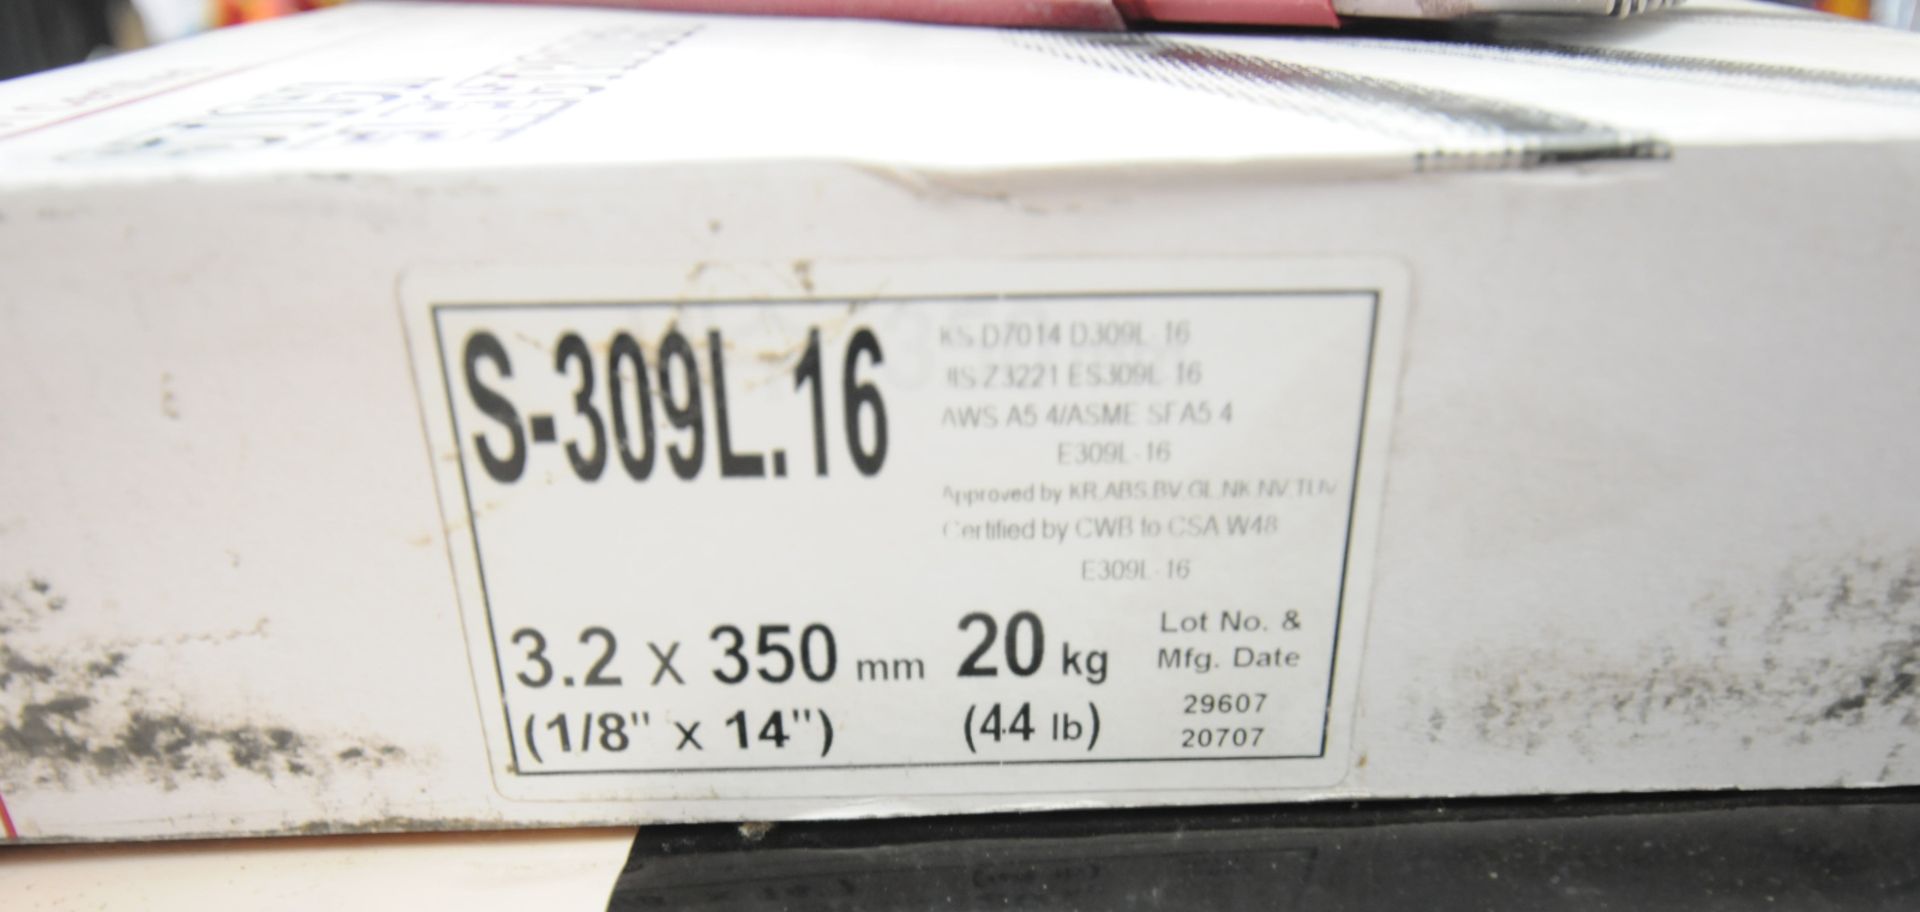 LOT/ (12) 44LB BOXES OF HYUNDAI S-309L.16 1/8"X14" STICK WELDING ELECTRODES CWB CERTIFIED TO CSA W48 - Image 3 of 4